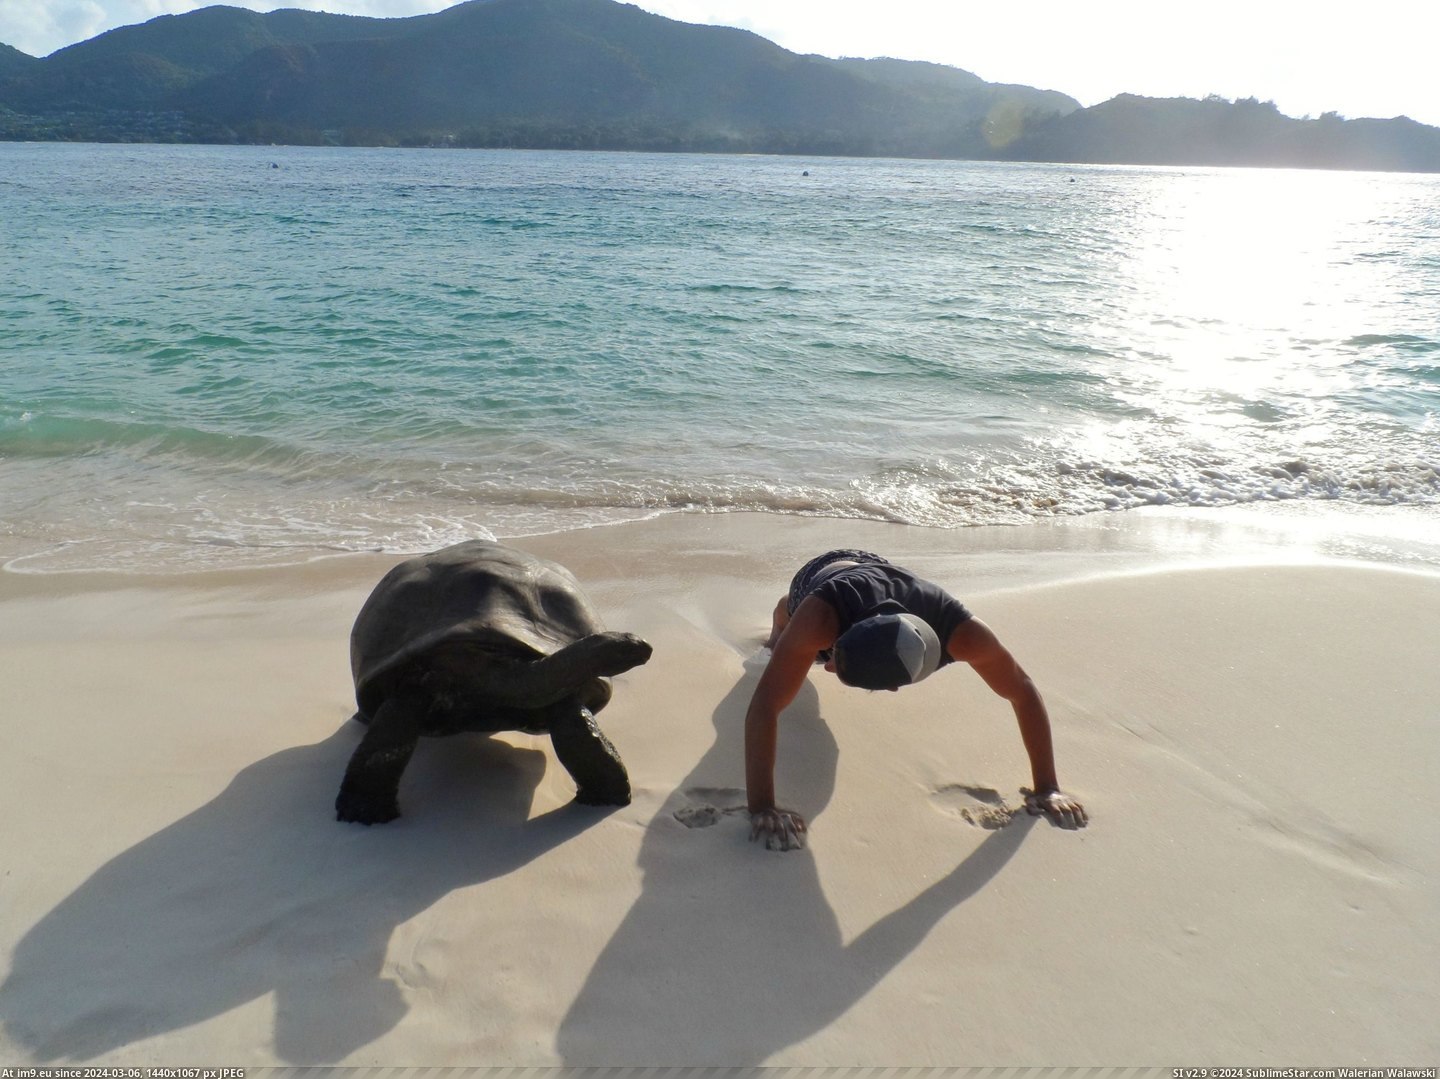 #Small #Island #Workout #Buddy #Boyfriend [Pics] Currently volunteering on a small island in the Seychelles - my boyfriend found a new workout buddy! Pic. (Obraz z album My r/PICS favs))